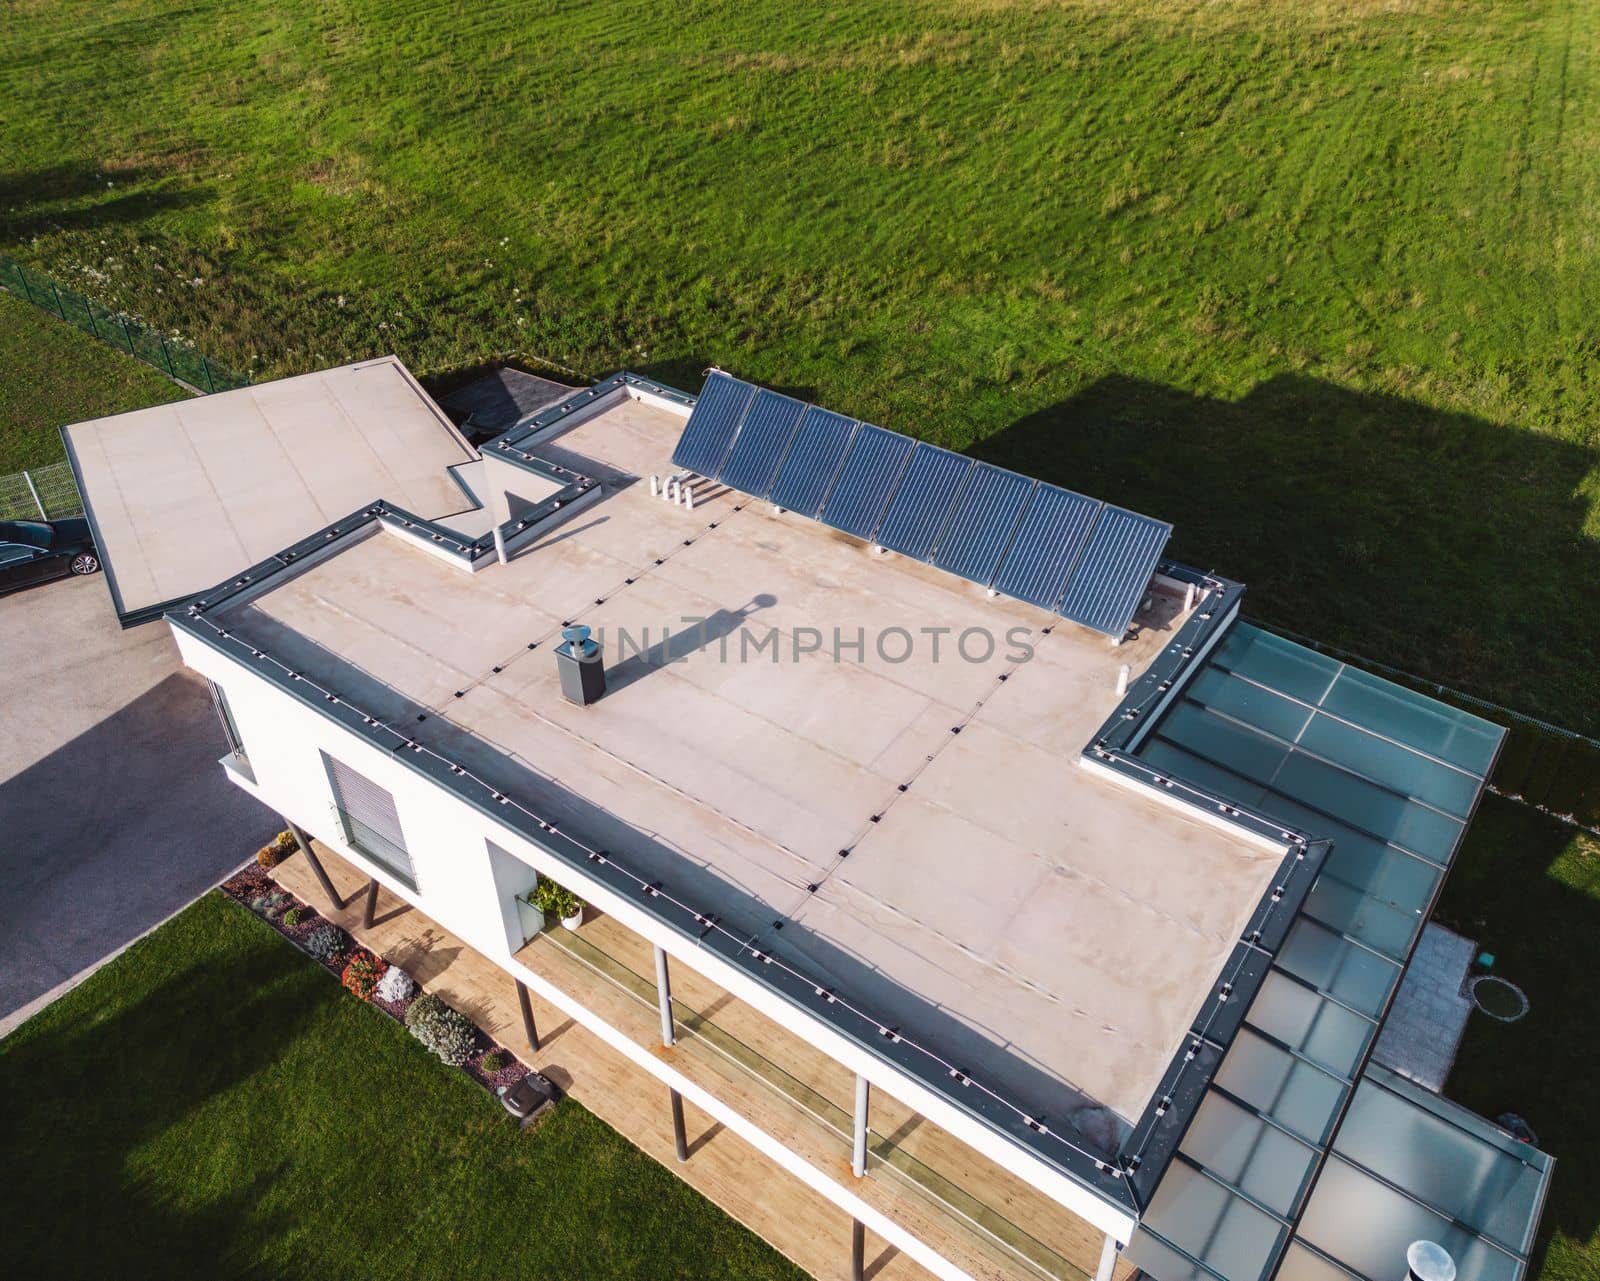 Modern family home, view from the air with solar panels on the roof top by VisualProductions